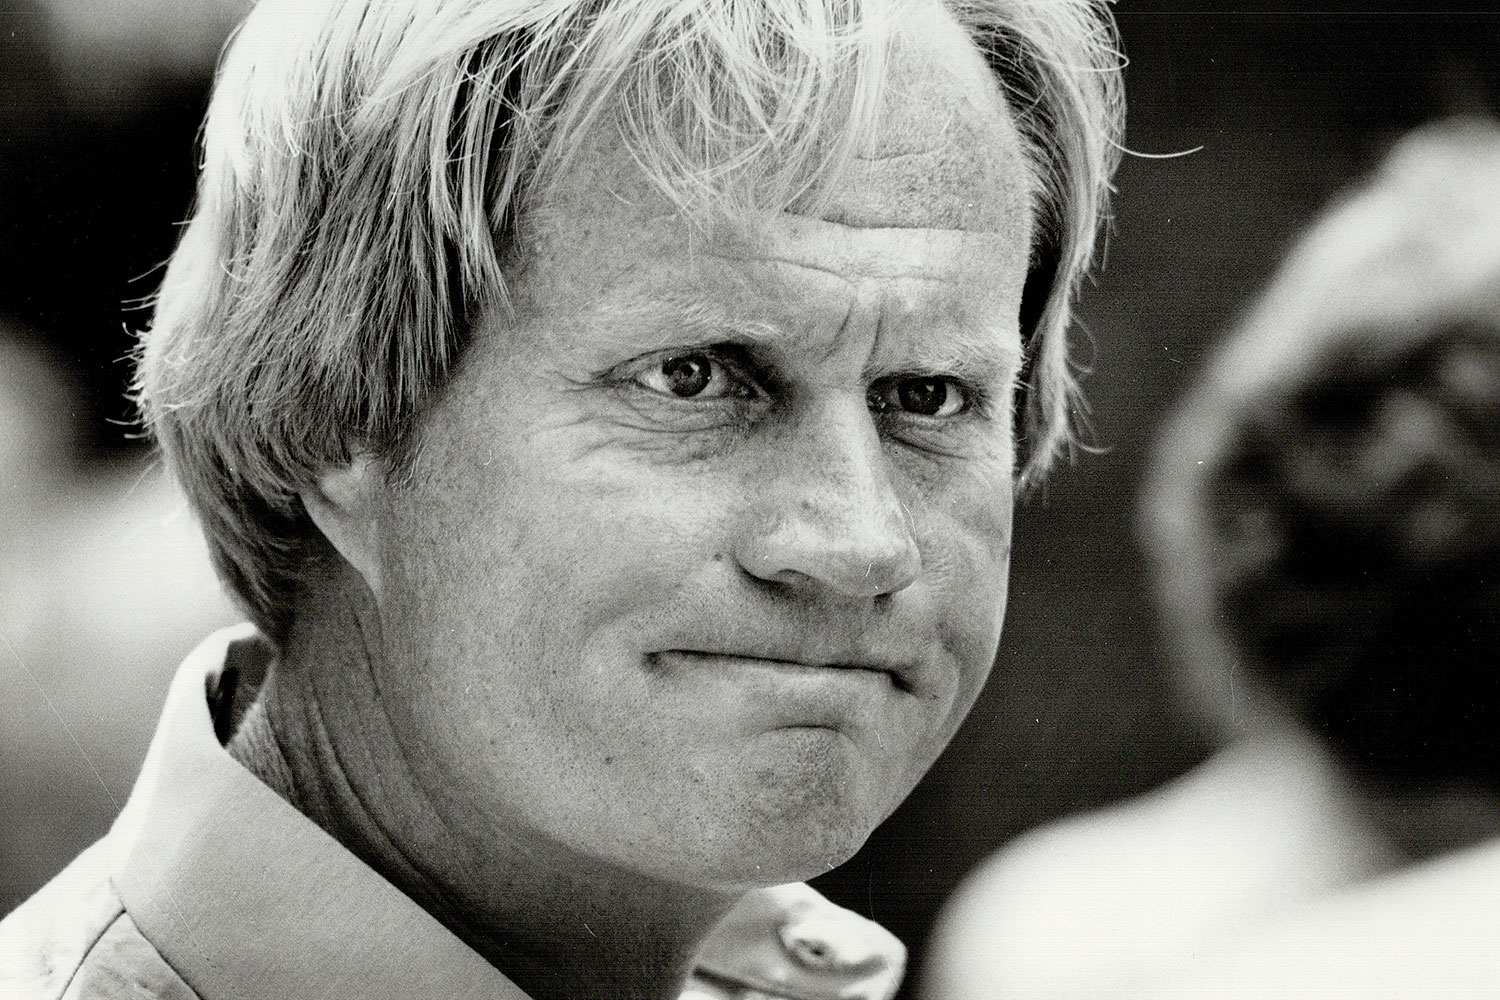 In 1982, Jack Nicklaus was still a formidable force at age 42.